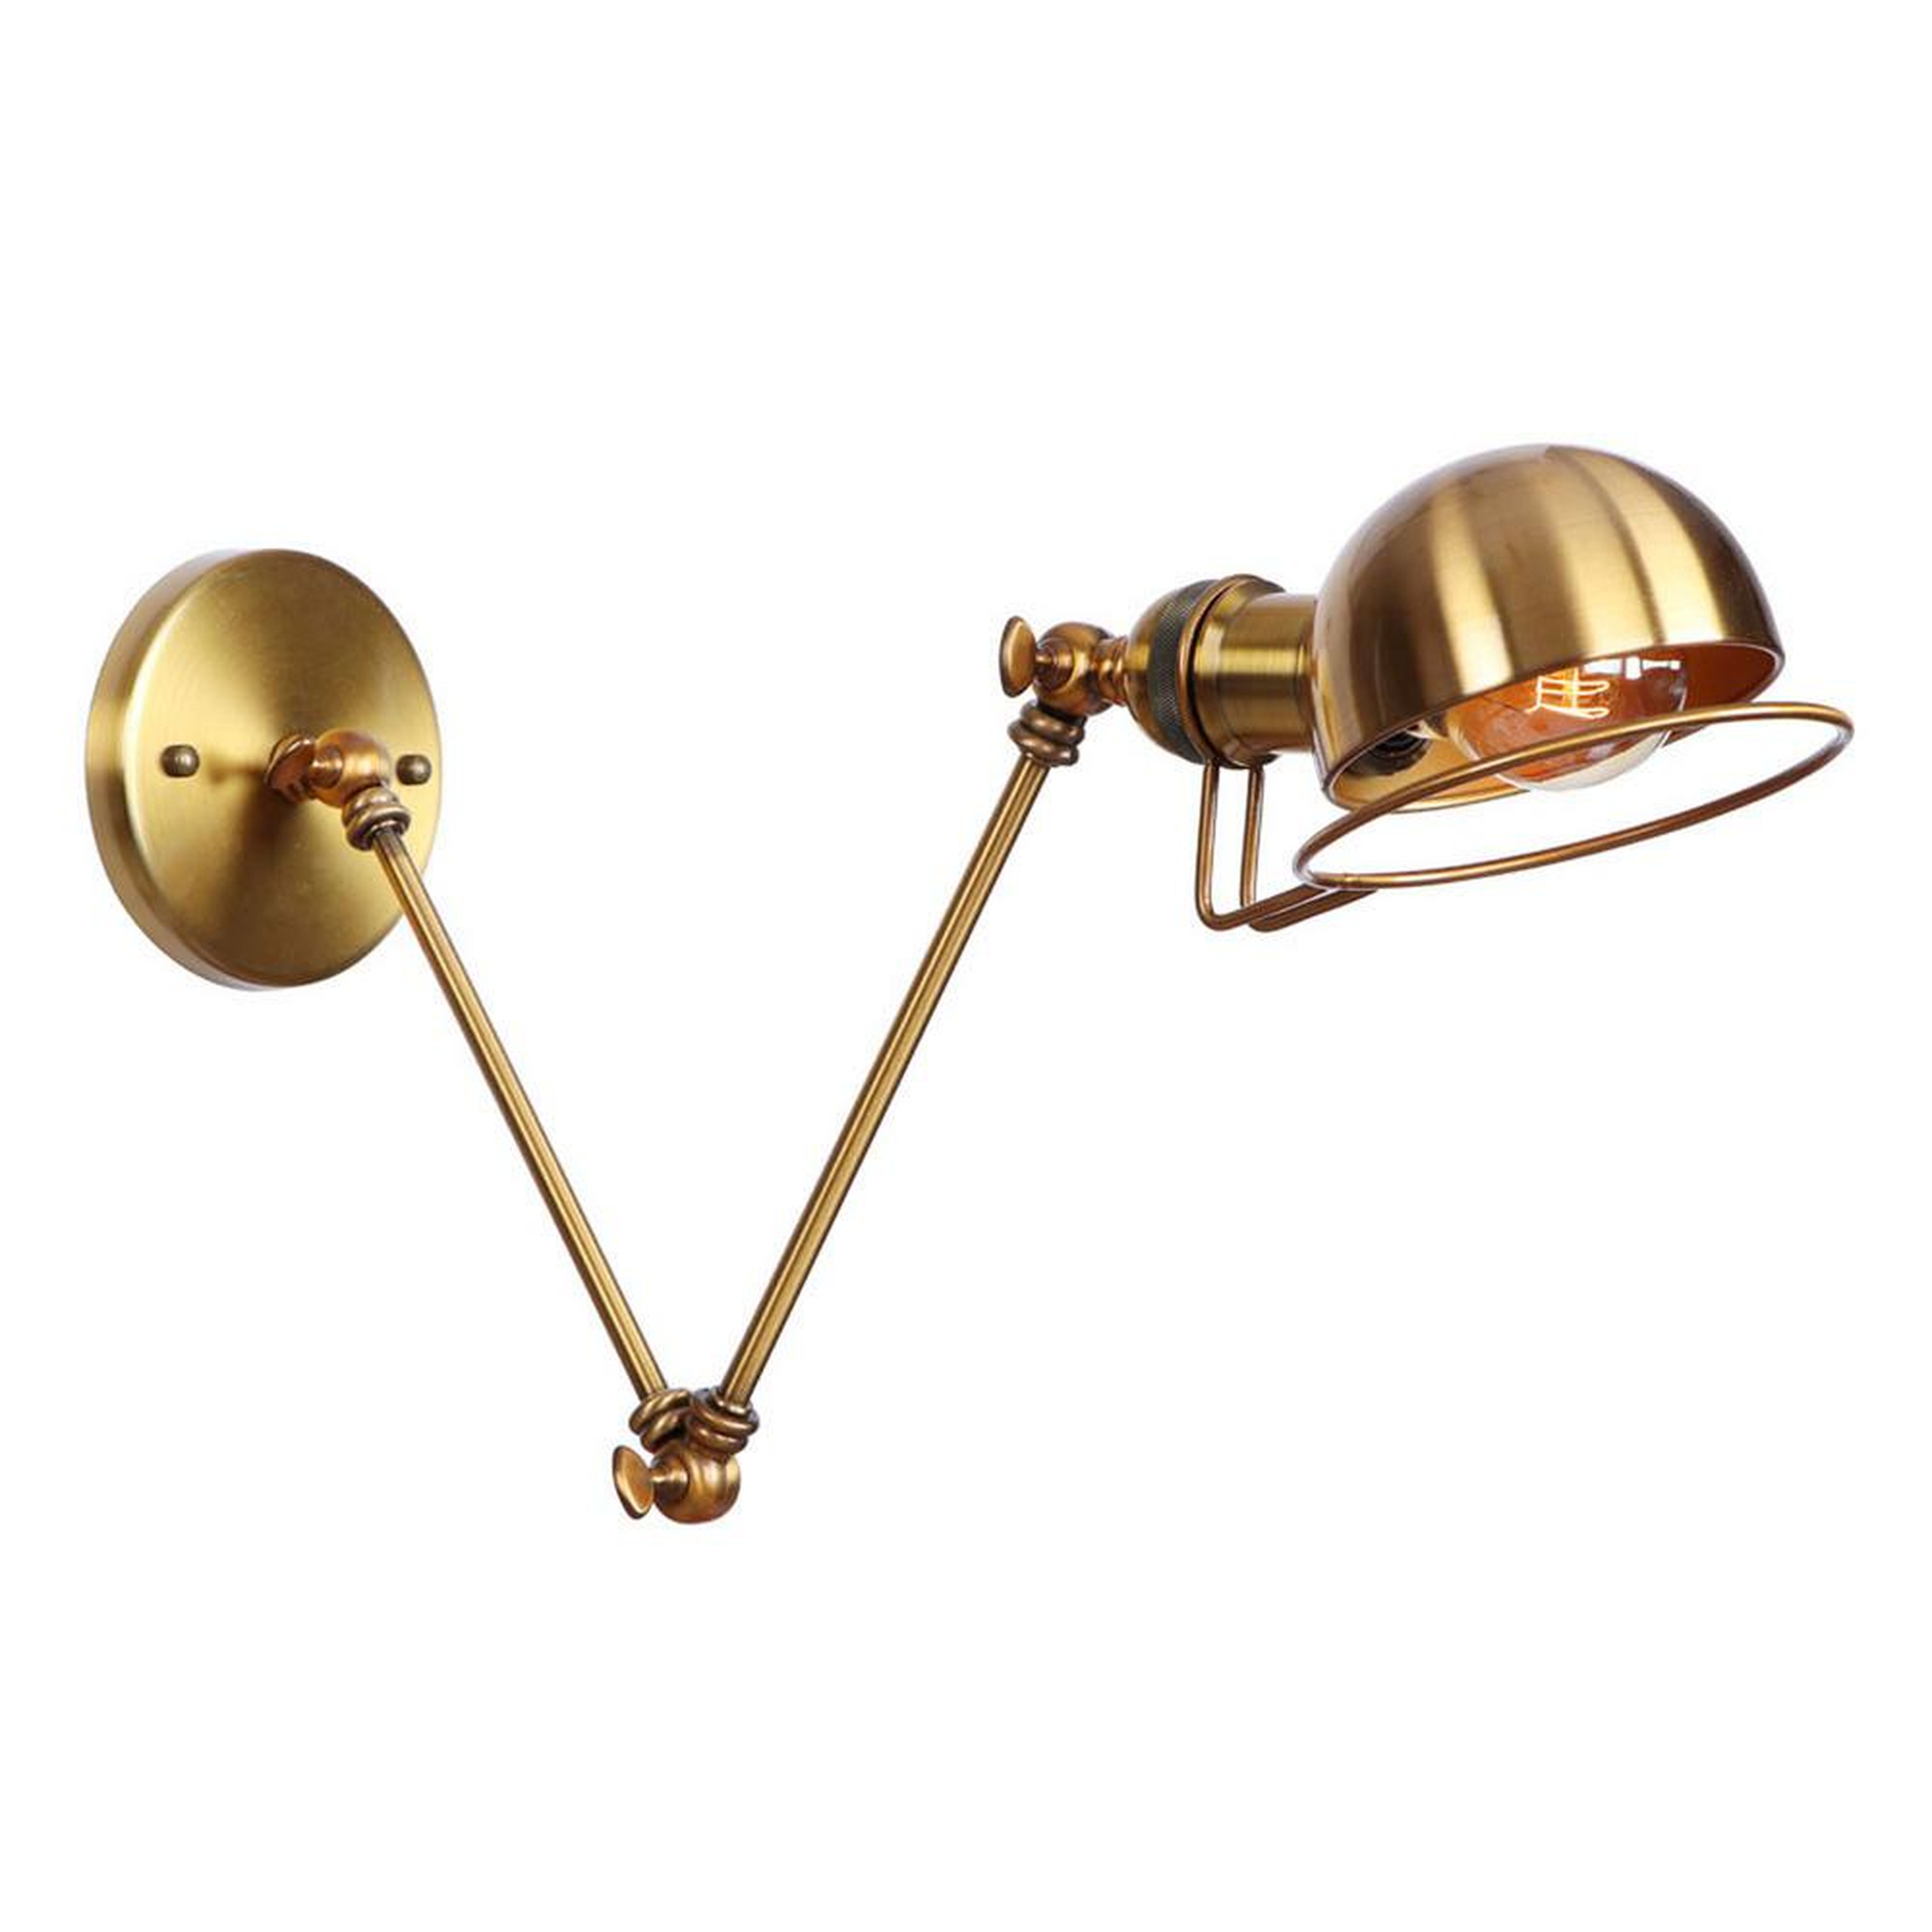 YZZY 1-Light Brass Sconce Industrial Vintage Wall Lamp with Swing Arm - Home Depot